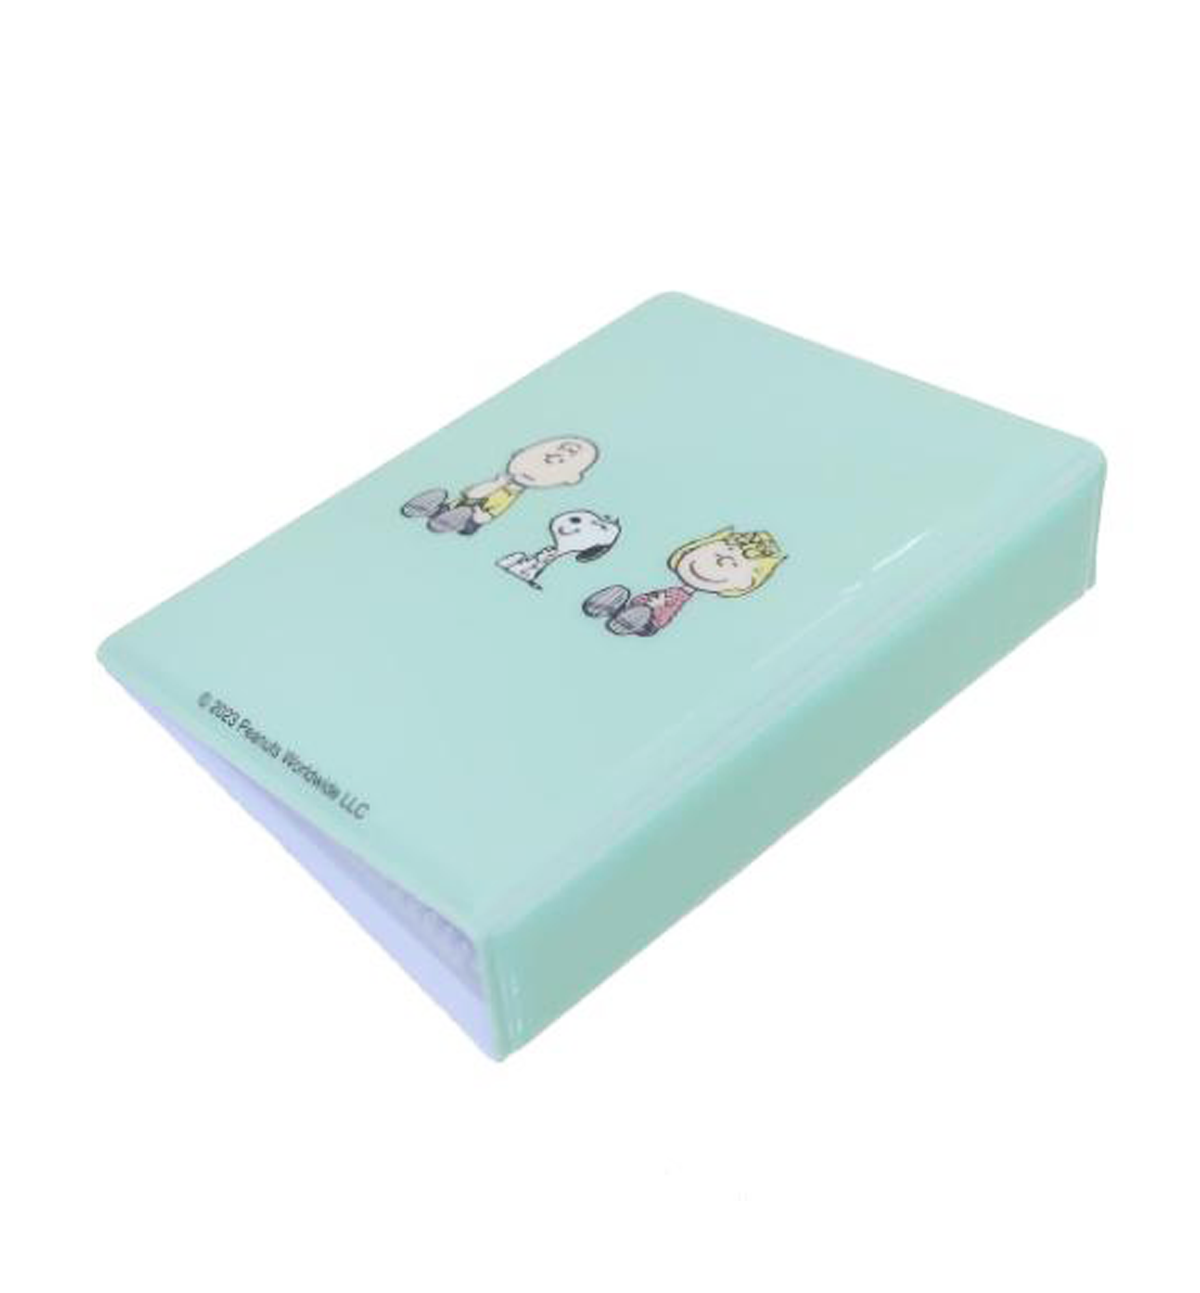 Peanuts Snoopy & Friends Photocard Collect Book [Mint]